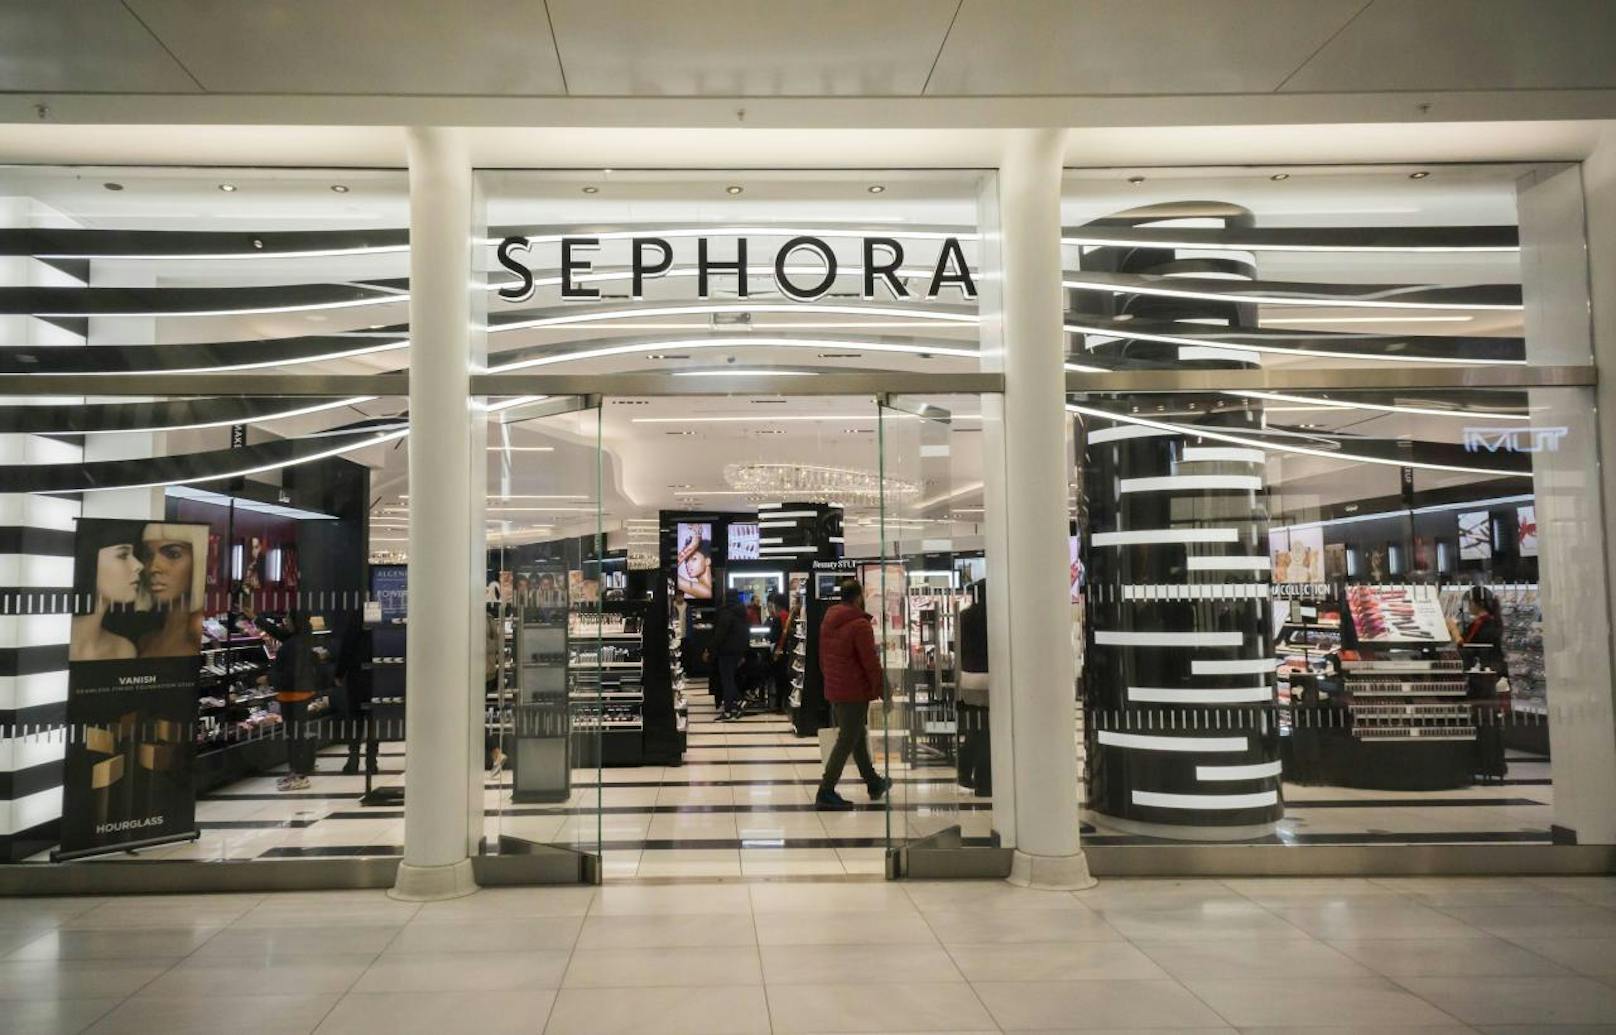 Sephora beauty store in the Oculus in New York A branch of the French make up and beauty chain, Sephora, located in the Westfield shopping mall in the Oculus in New York on Saturday, February 11, 2017. Sephora is a brand of the luxury retail conglomerate LVMH. ( PUBLICATIONxNOTxINxUSAxUK RichardxB.xLevine

Sephora Beauty Store in The Oculus in New York a Branch of The French Make up and Beauty CHAin Sephora Located in The Westfield Shopping Mall in The Oculus in New York ON Saturday February 11 2017 Sephora IS a Brand of The Luxury Retail conglomerate LVMH PUBLICATIONxNOTxINxUSAxUK RichardxB xLevine  